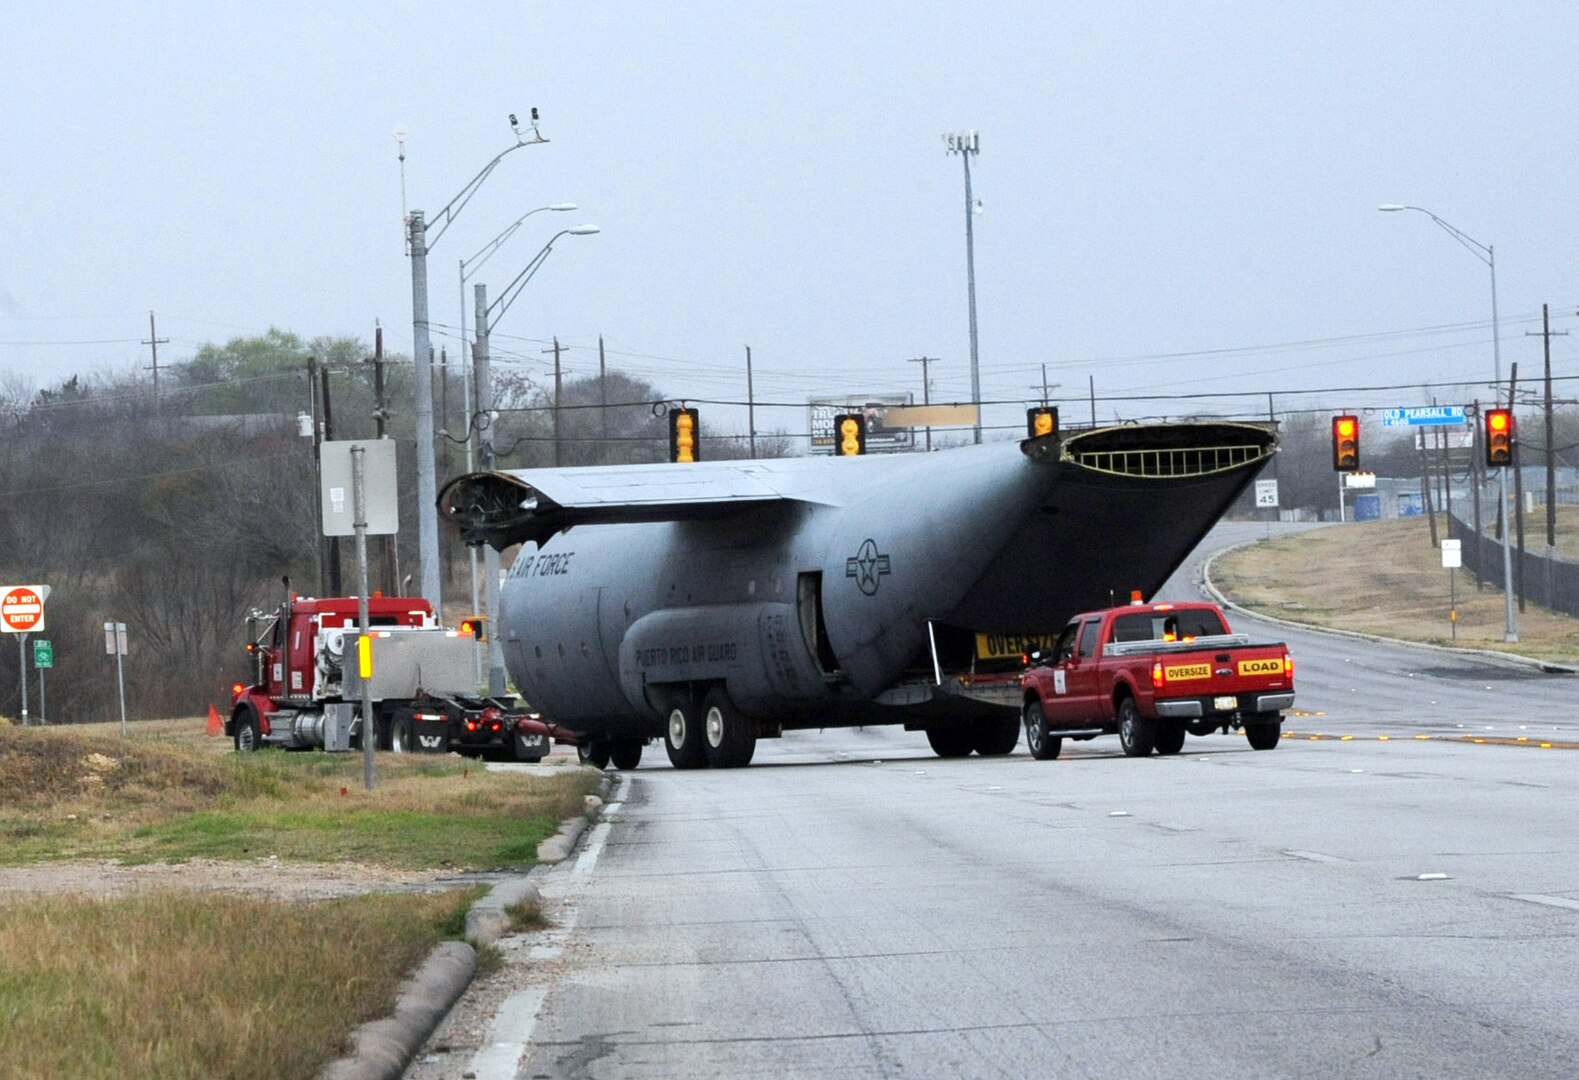 A retired and partially disassembled Air Force C-130 Hercules cargo aircraft is escorted by contractor World Wide Aircraft Recovery and local volunteers March 2 enroute to the Medical Readiness Training Center at Joint Base San Antonio-Camp Bullis. The 502nd Trainer Development Squadron members at JBSA-Randolph were responsible for the aircraft's four-hour move and will also accomplish the simulation project inside the aircraft that will simulate sights, sounds and smells of a medic's combat environment. (U.S. Air Force photo by Airman 1st Class Kenna Jackson)